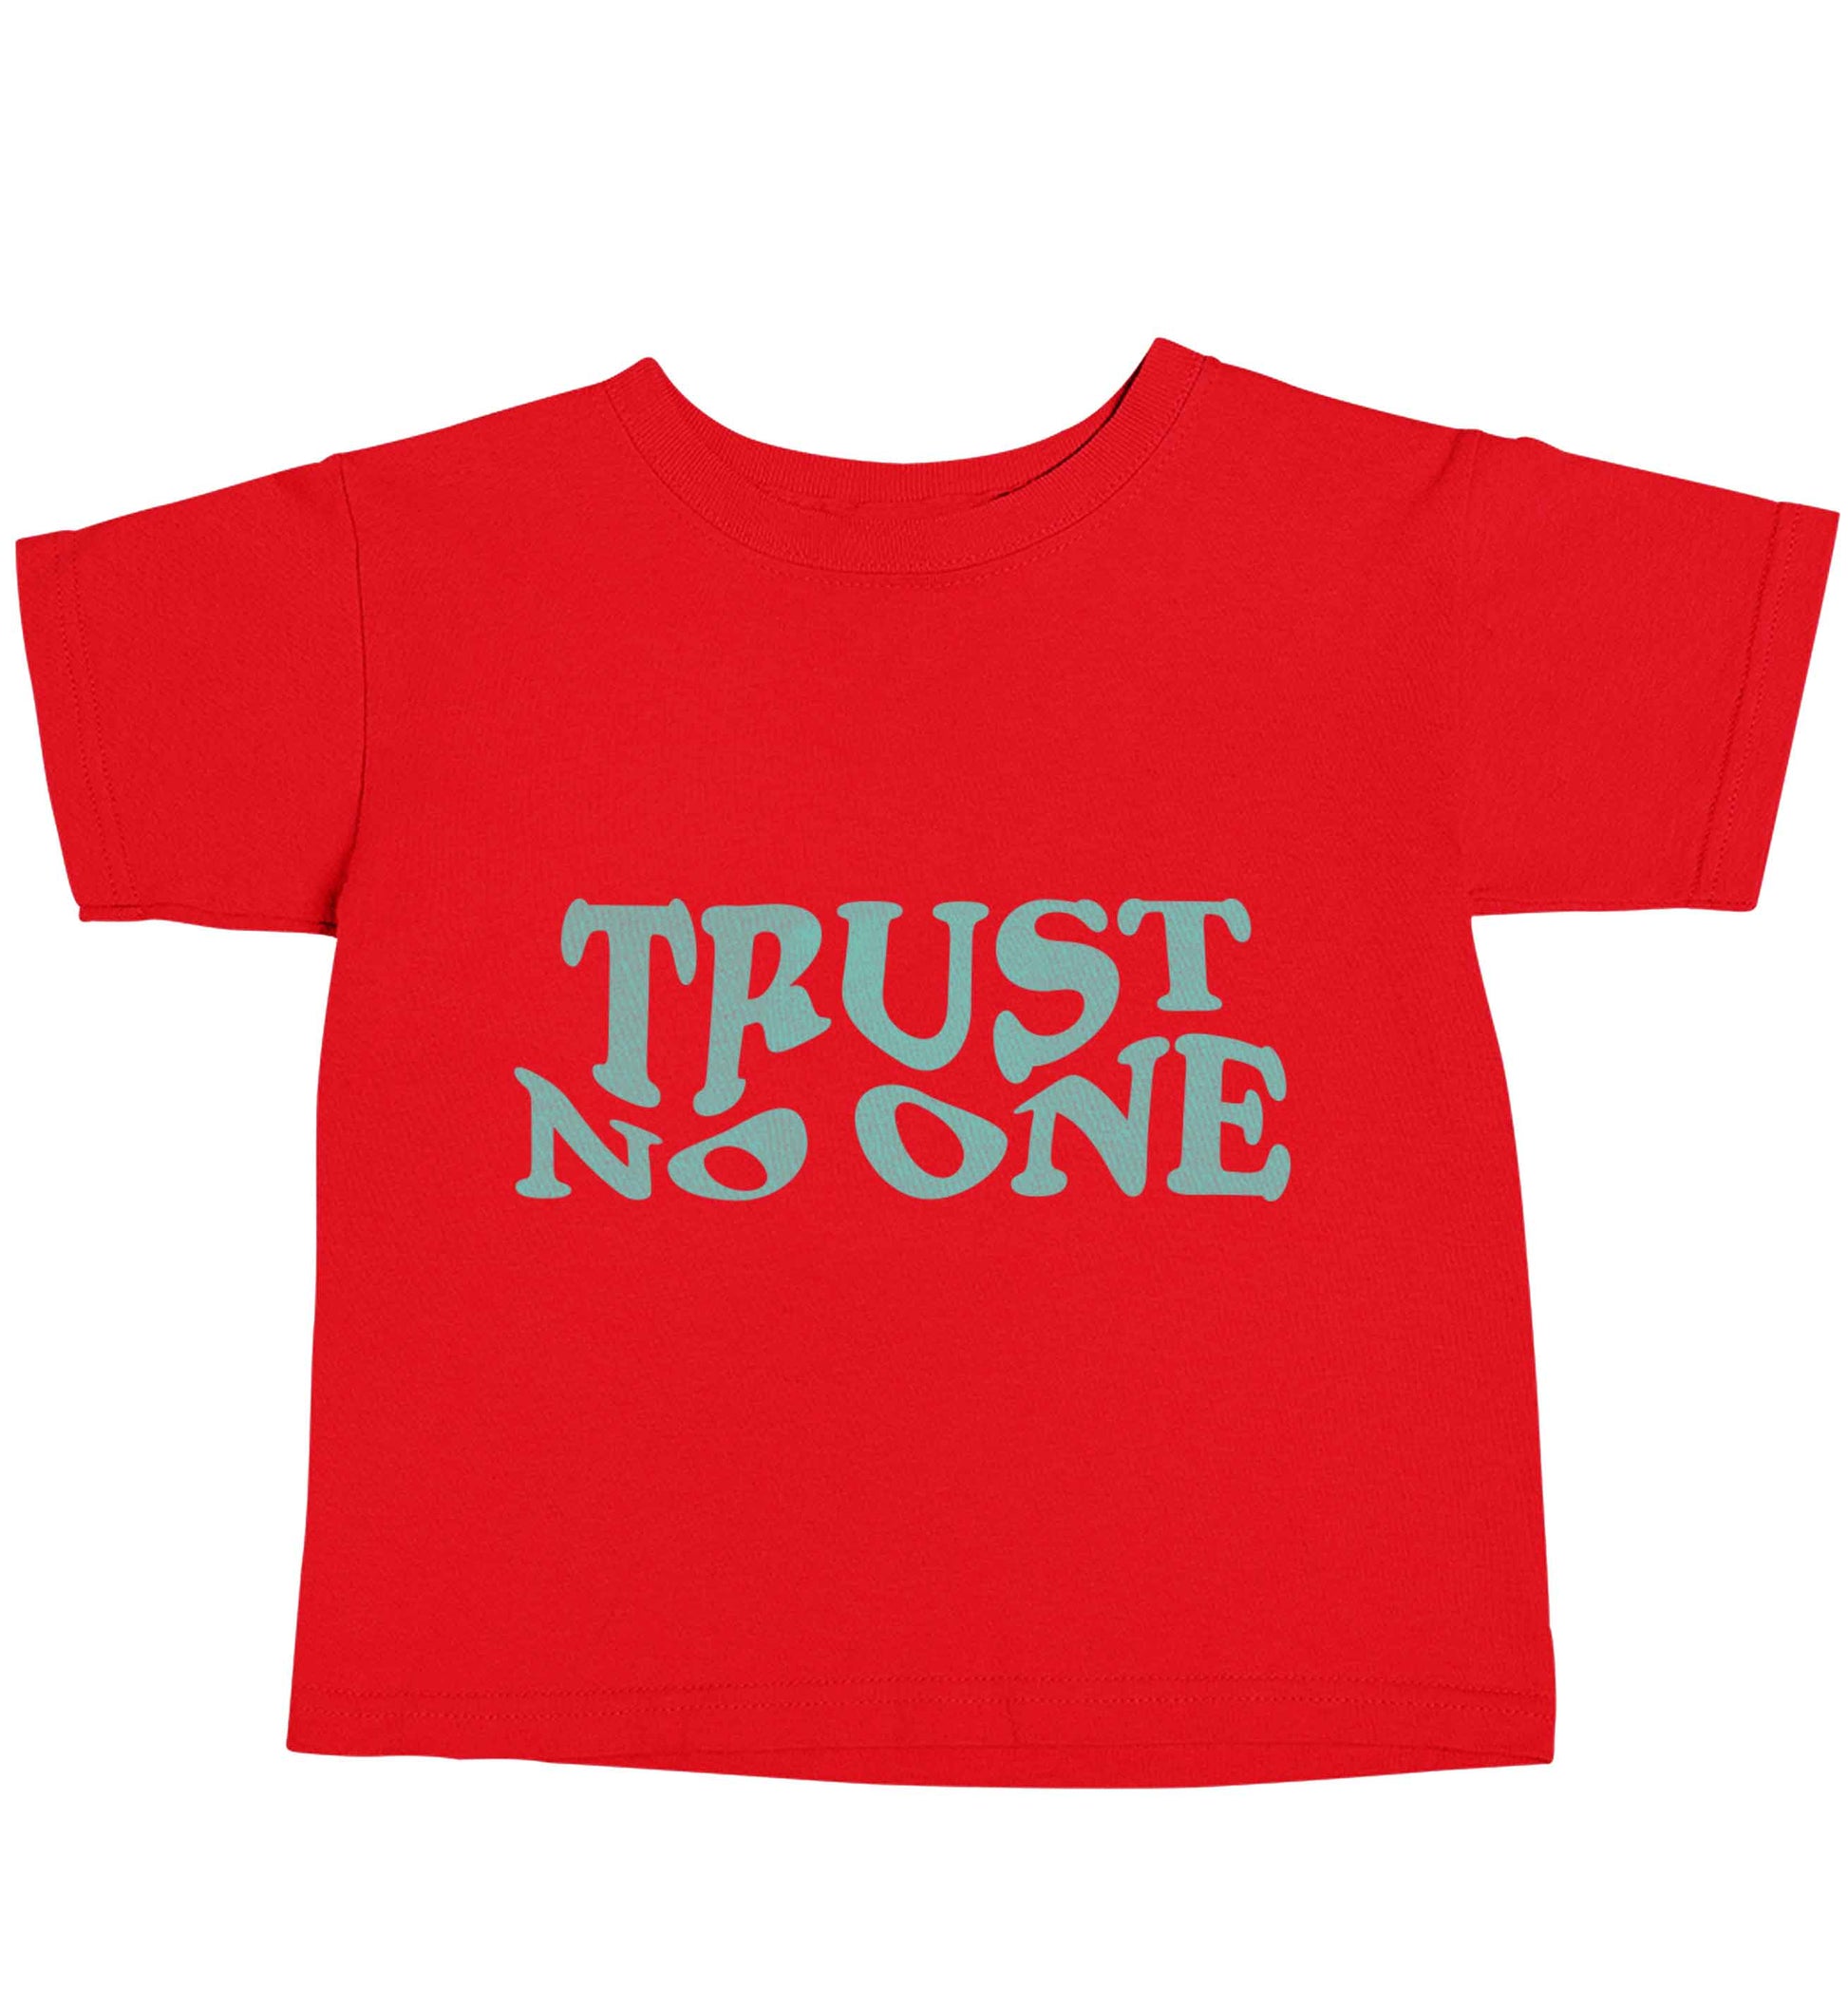 Trust no one red baby toddler Tshirt 2 Years